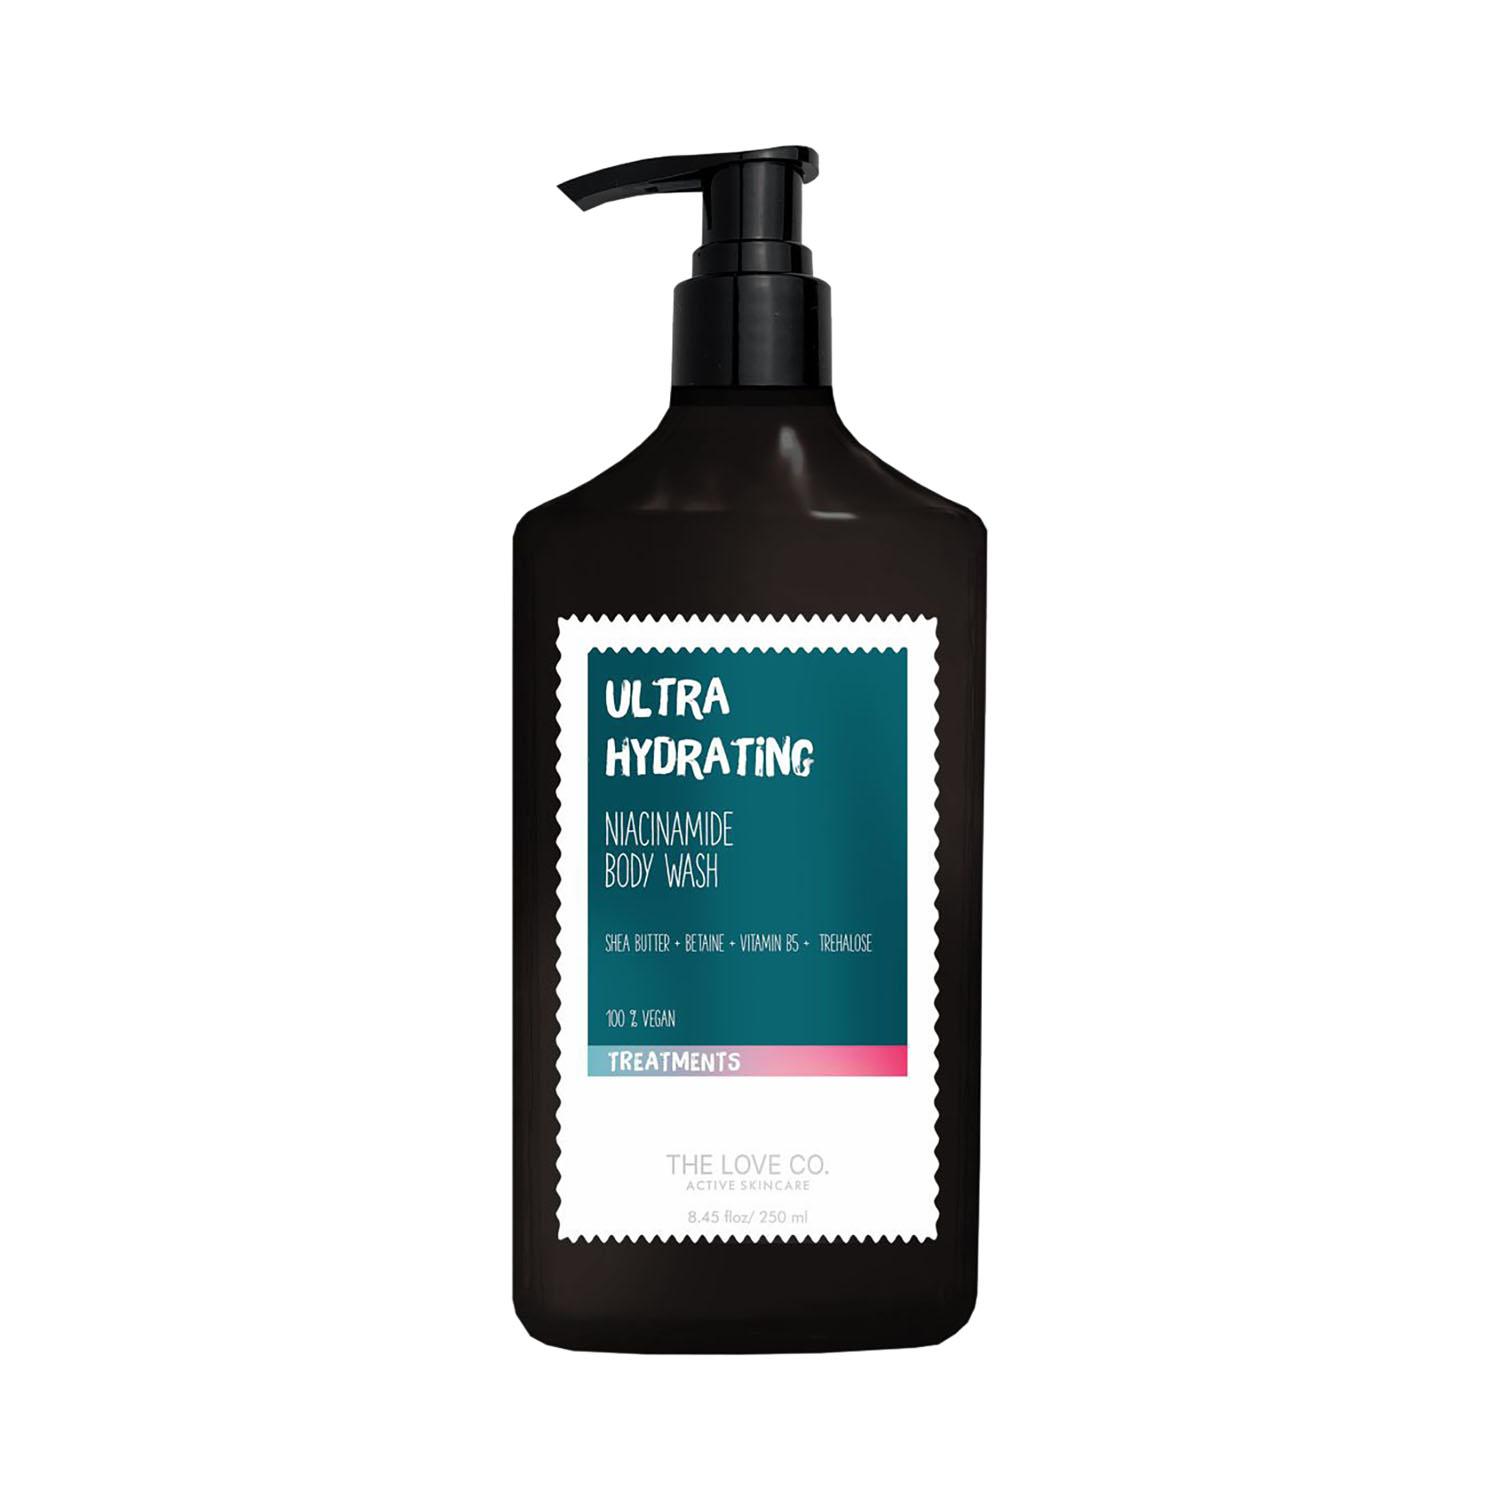 THE LOVE CO. | THE LOVE CO. Ultra Hydrating With Niacinamide Body Wash (250ml)